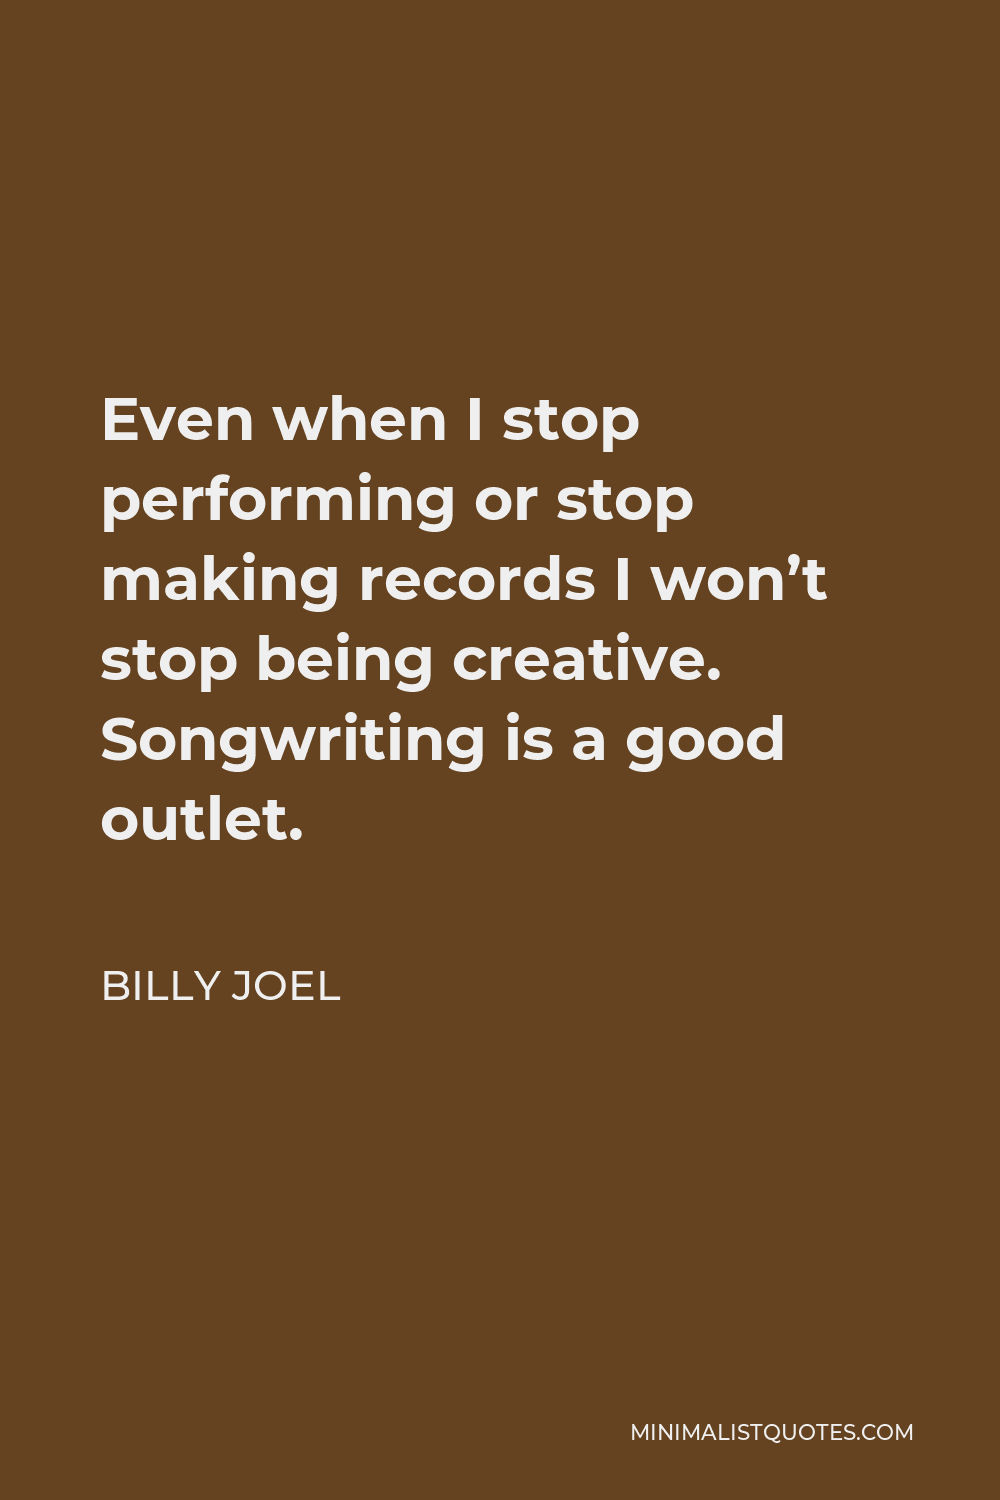 Billy Joel Quote - Even when I stop performing or stop making records I won’t stop being creative. Songwriting is a good outlet.